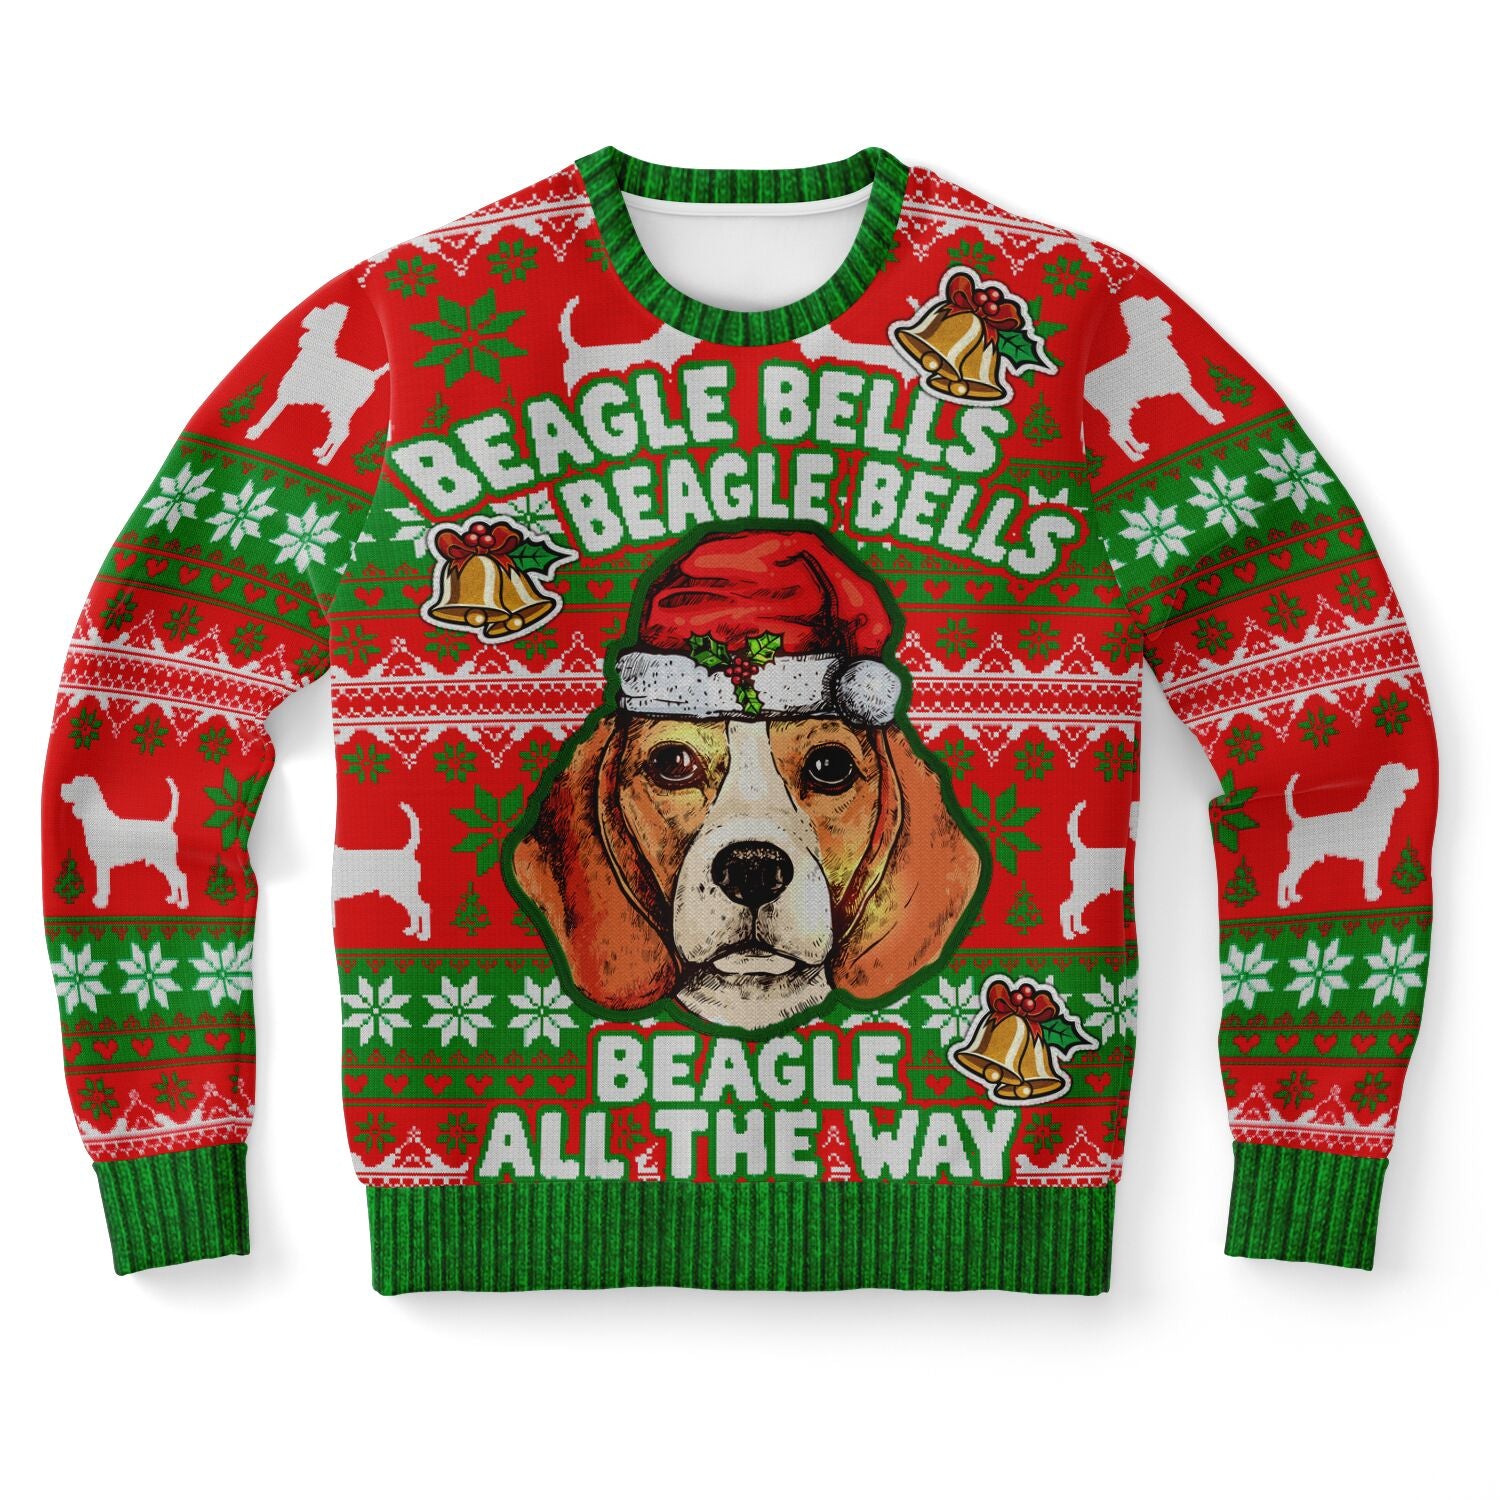 Beagle Bells Ugly Sweater - XS - Sport Finesse